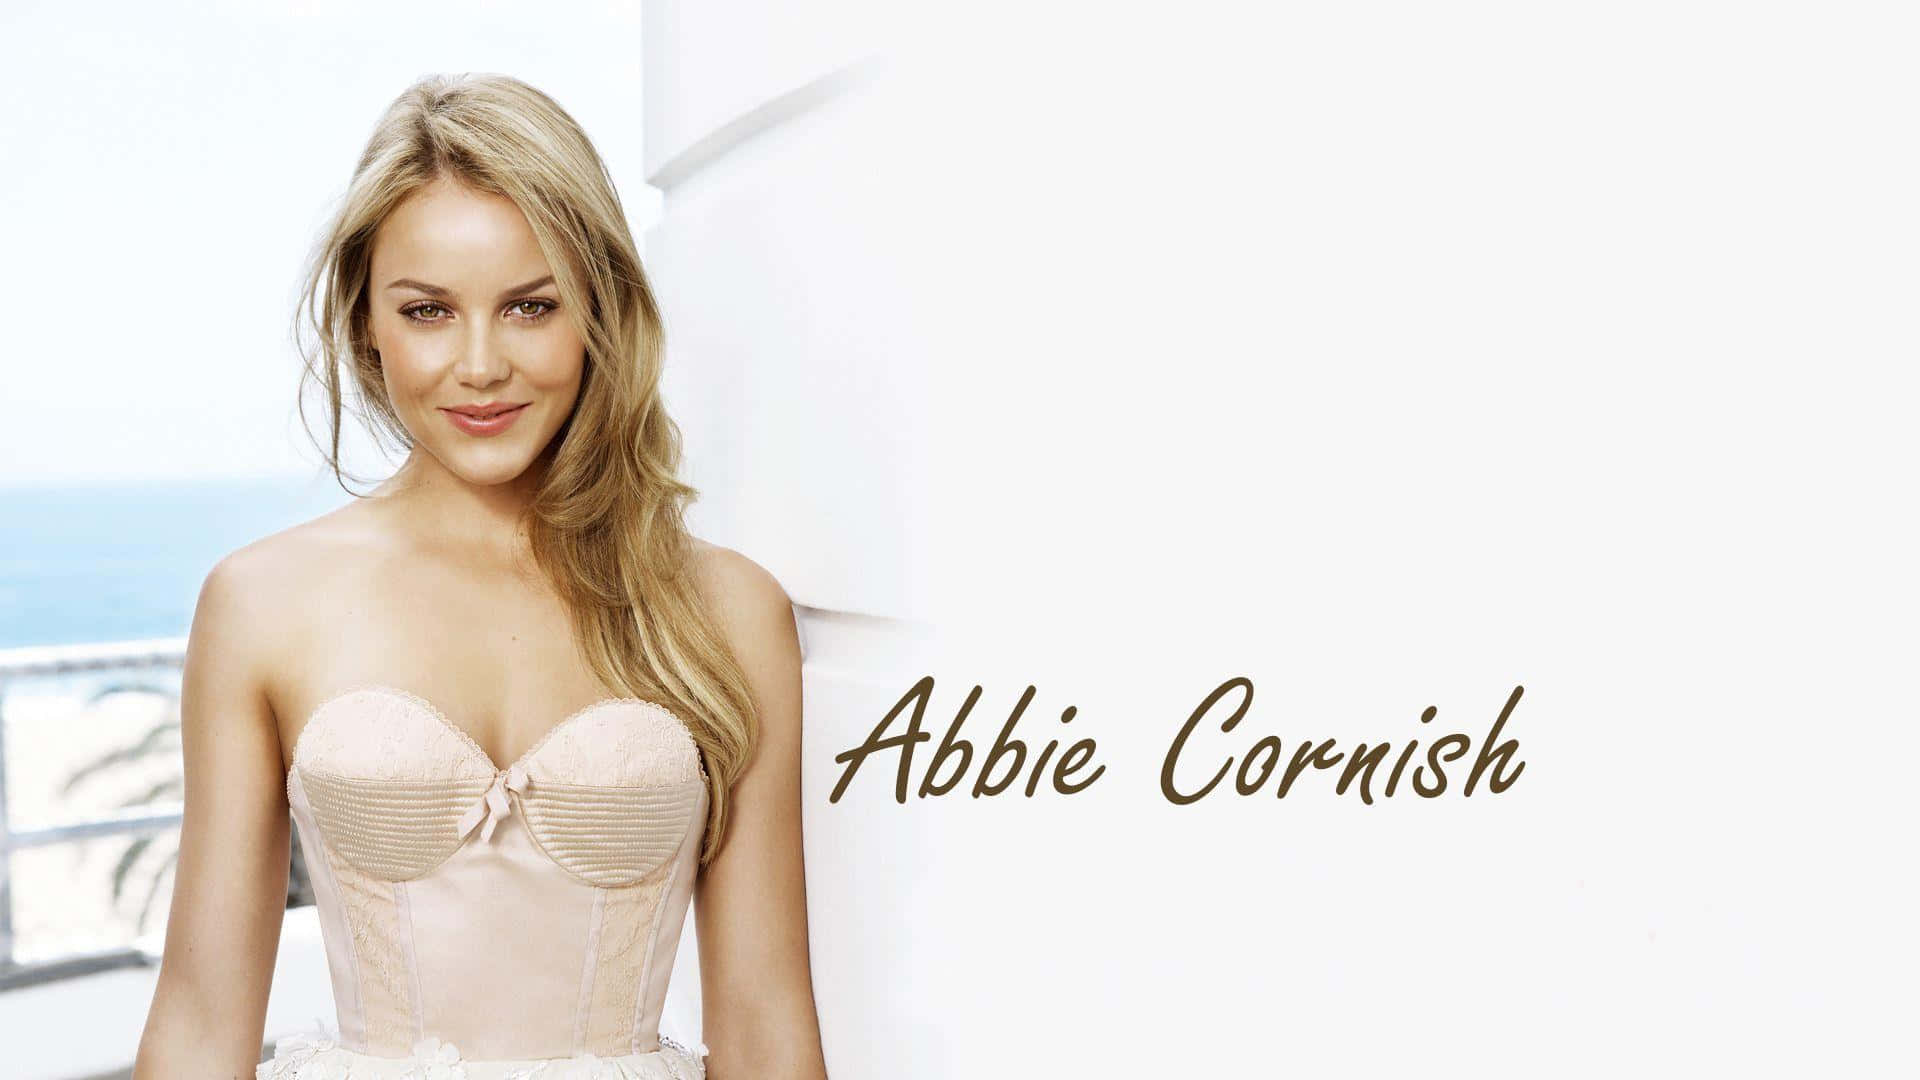 Abbie Cornish striking a pose in a classy outfit Wallpaper